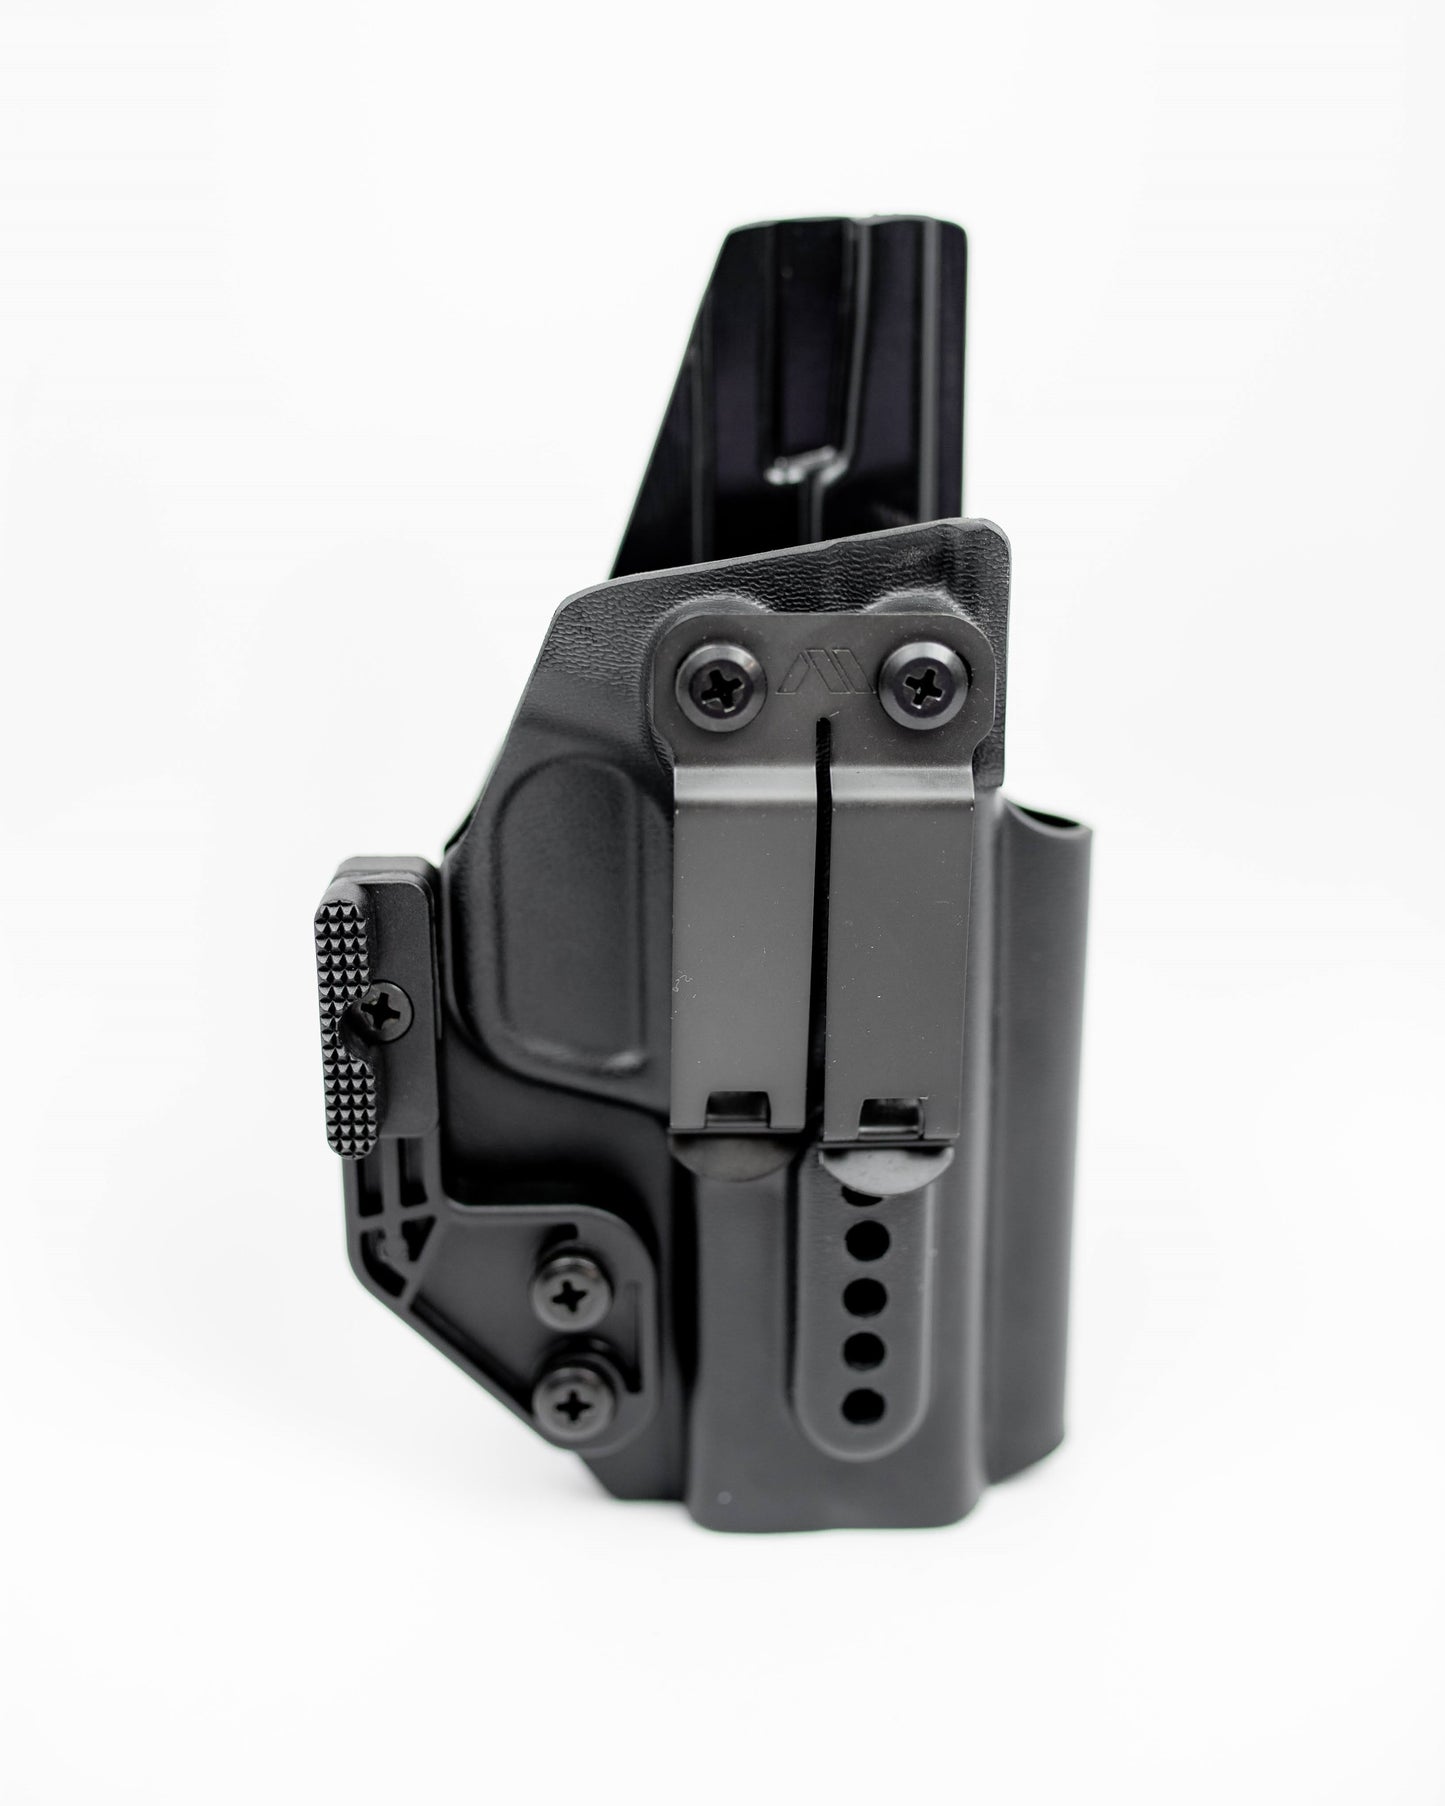 Smith and Wesson Shield EZ 9 IWB Holster